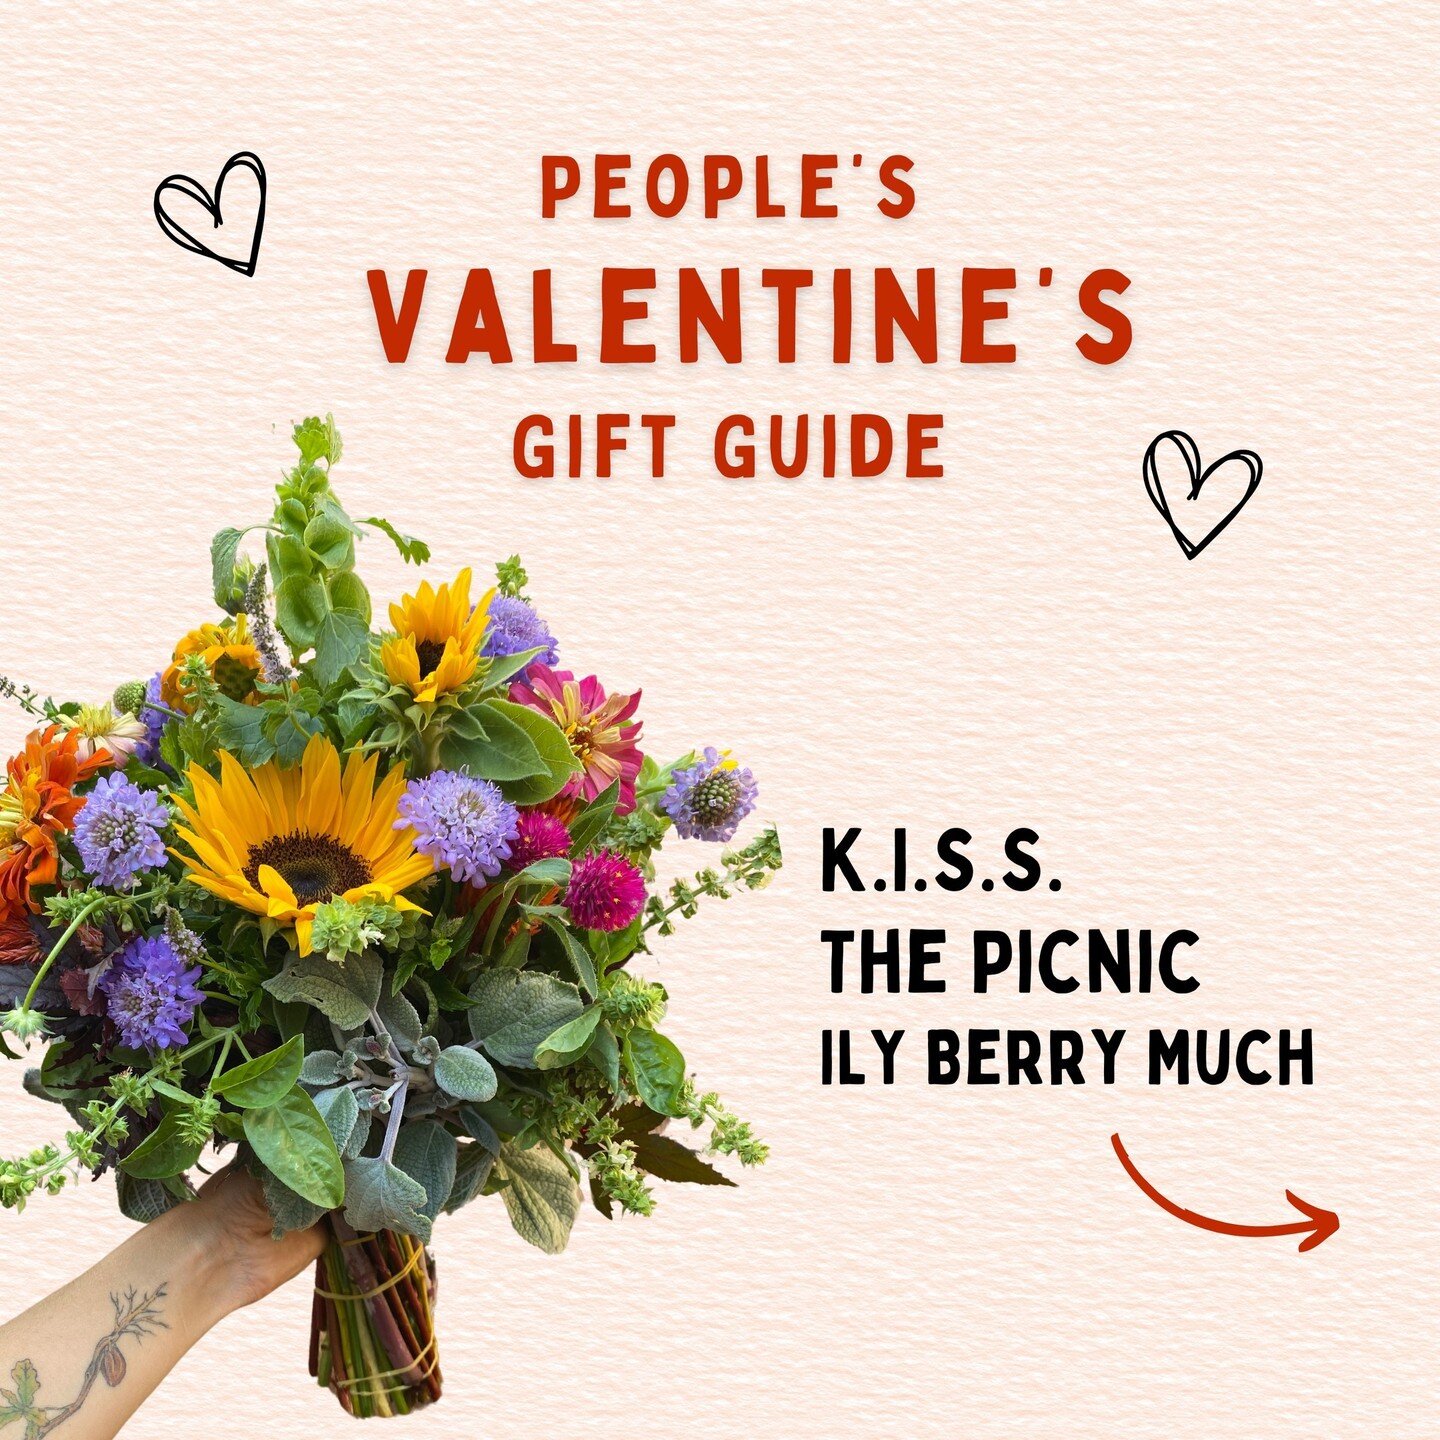 People's Valentine's Gift Guide! 💕 Featuring limited time sweets from People's Vegan Deli and our Valentine's Beverage sale! ⁠
⁠
#valentines #giftguide #valentinesgifts #sustainableliving #vegantreats #vegancupcakes #galentines #oceanbeach #sustaina